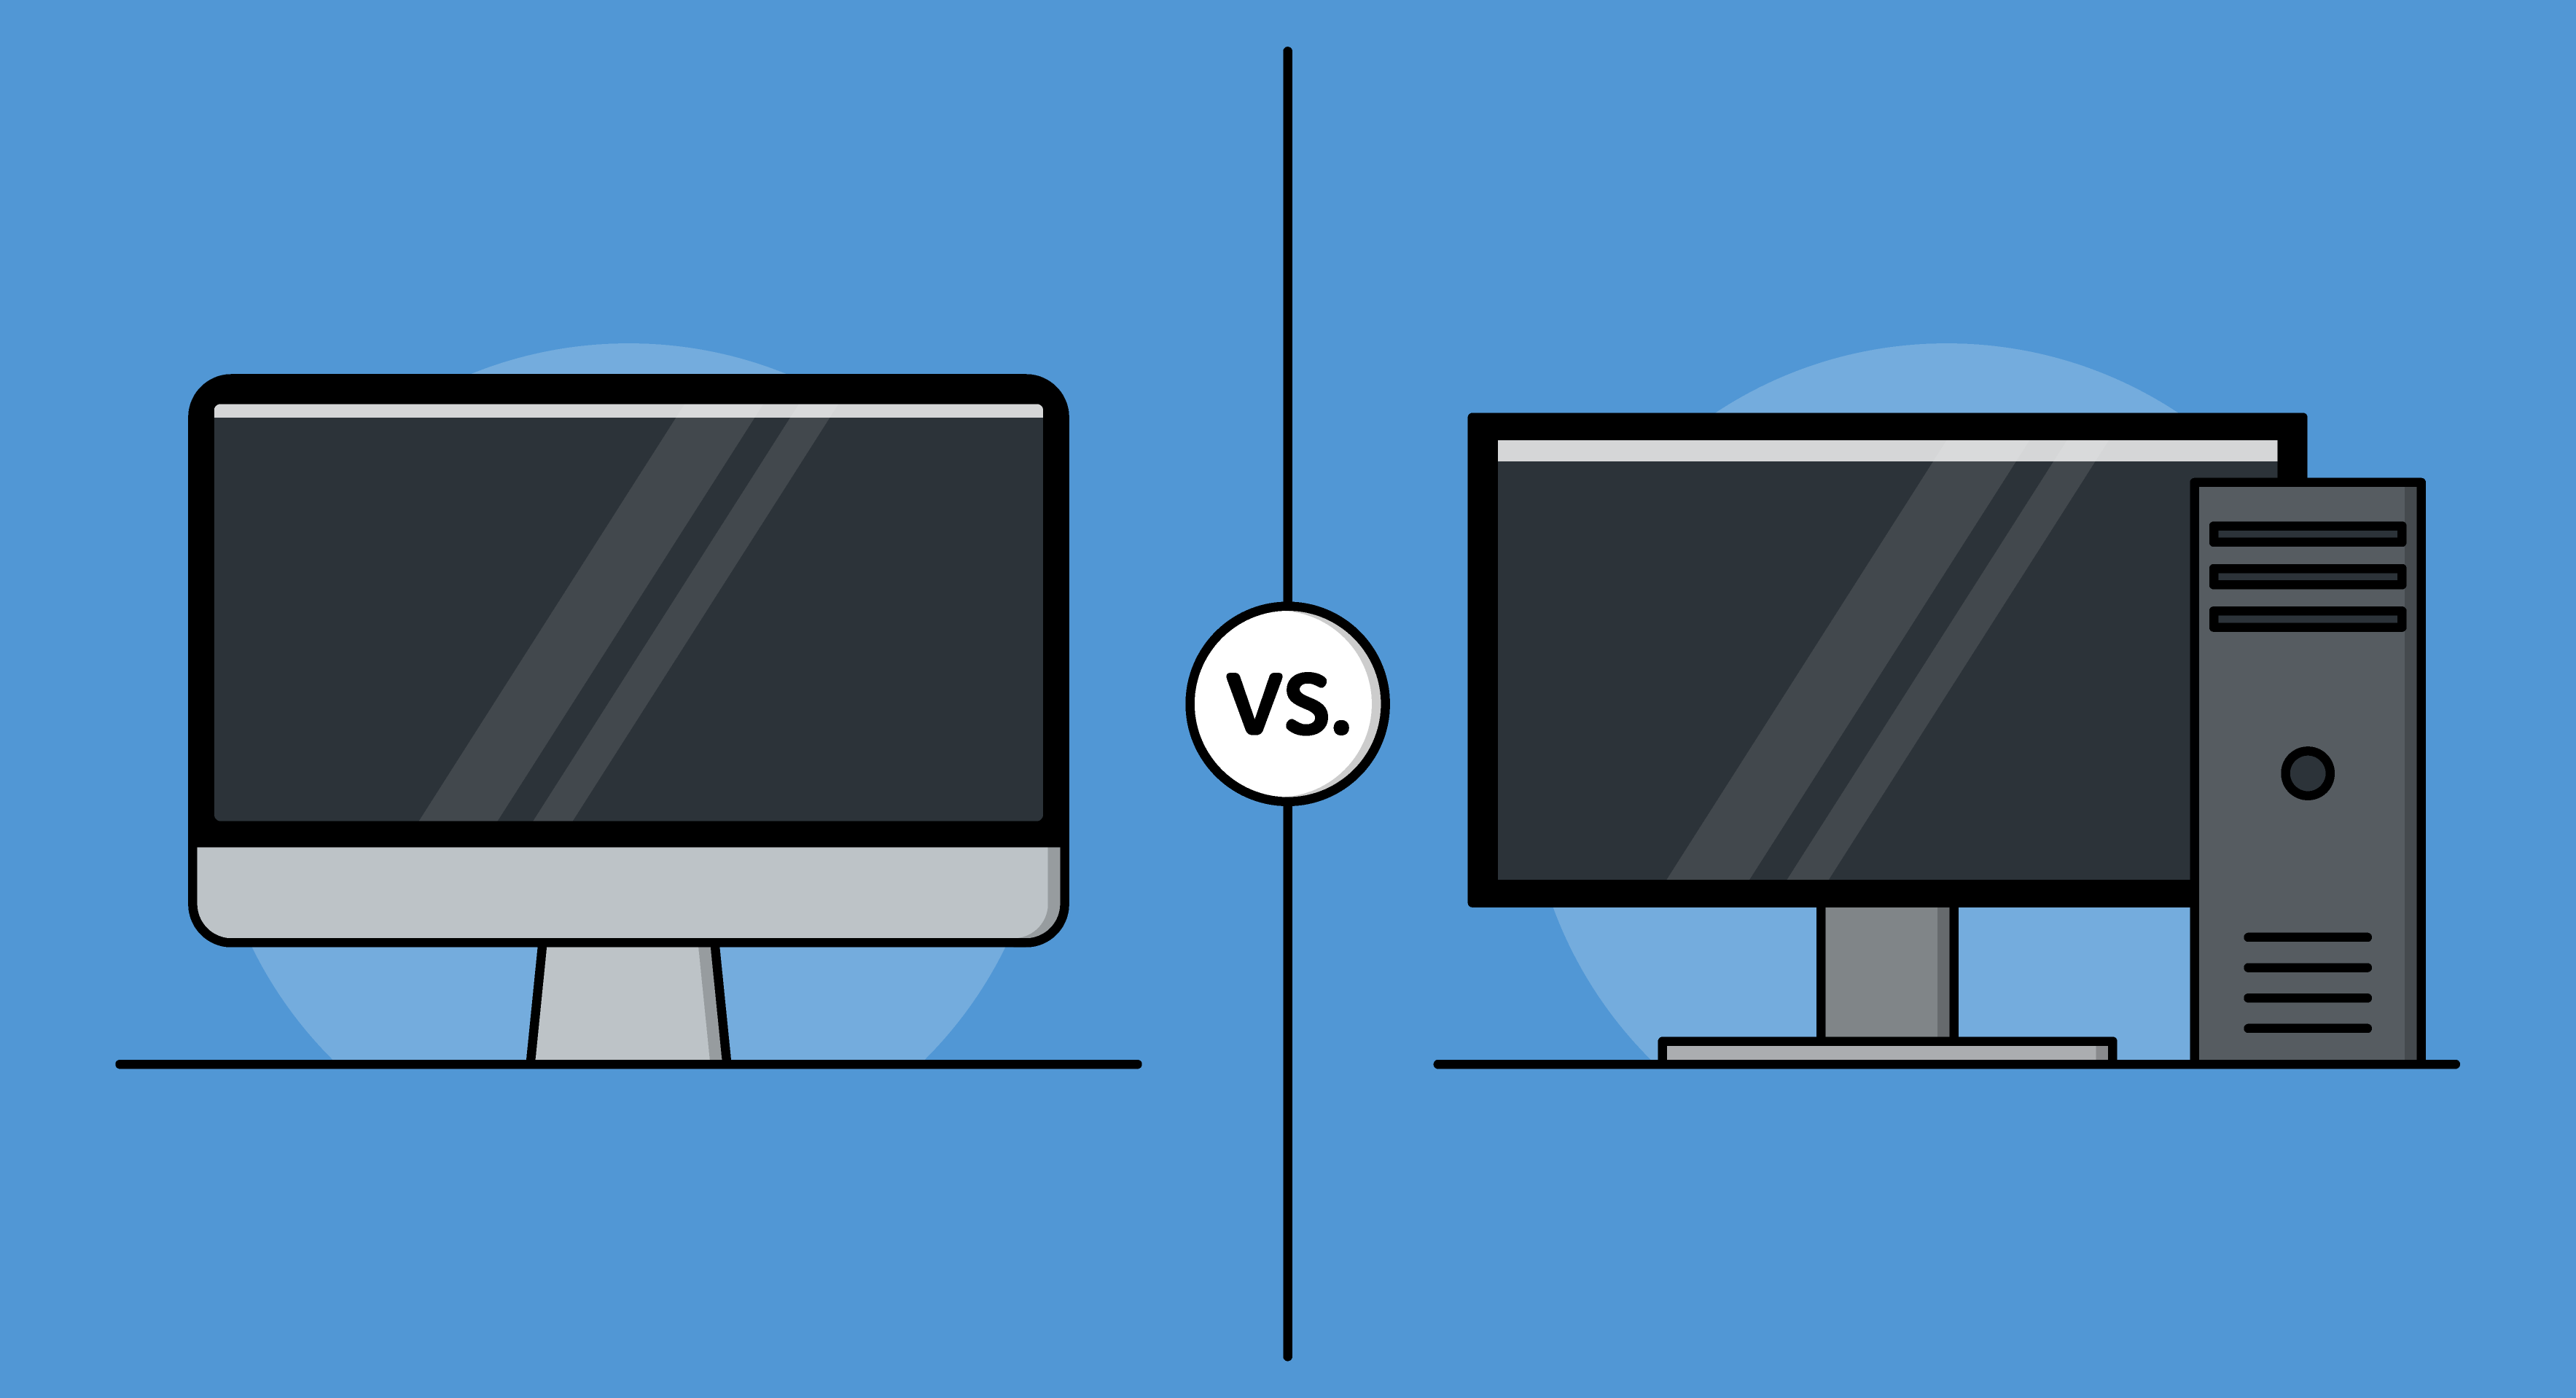 Mac vs. PC. Whats the difference between Mac and PC?